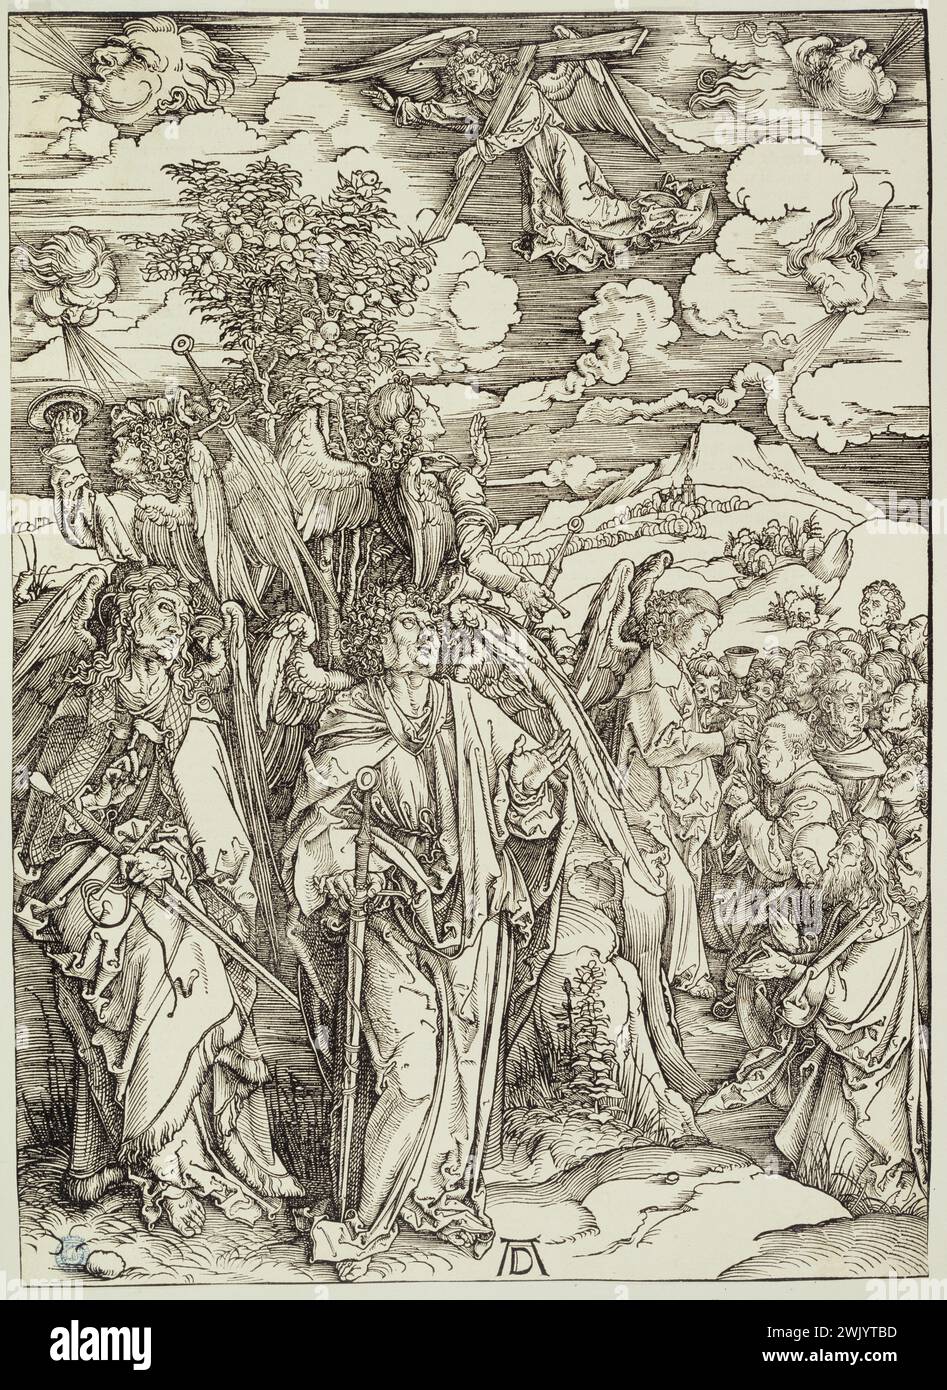 Albrecht Dürer (1471-1528). The apocalypse (German edition): the four angels holding the four winds of the earth (Bartsch 66). 1497. Museum of Fine Arts of the City of Paris, Petit Palais. 77217-7 Angel, Apocalypse, Catholic art, Chretian art, religious art, Christianity, Epee, Gospel according to Saint John, Ailee figure, sword, Holy History, Human, Humanite, Chretian iconography, Religious Iconography, New Testament, Aile character, Biblical character, Prophety , Biblical story, Christian religion, revelation, Renaissance, blow, wind, vision, engraving Stock Photo